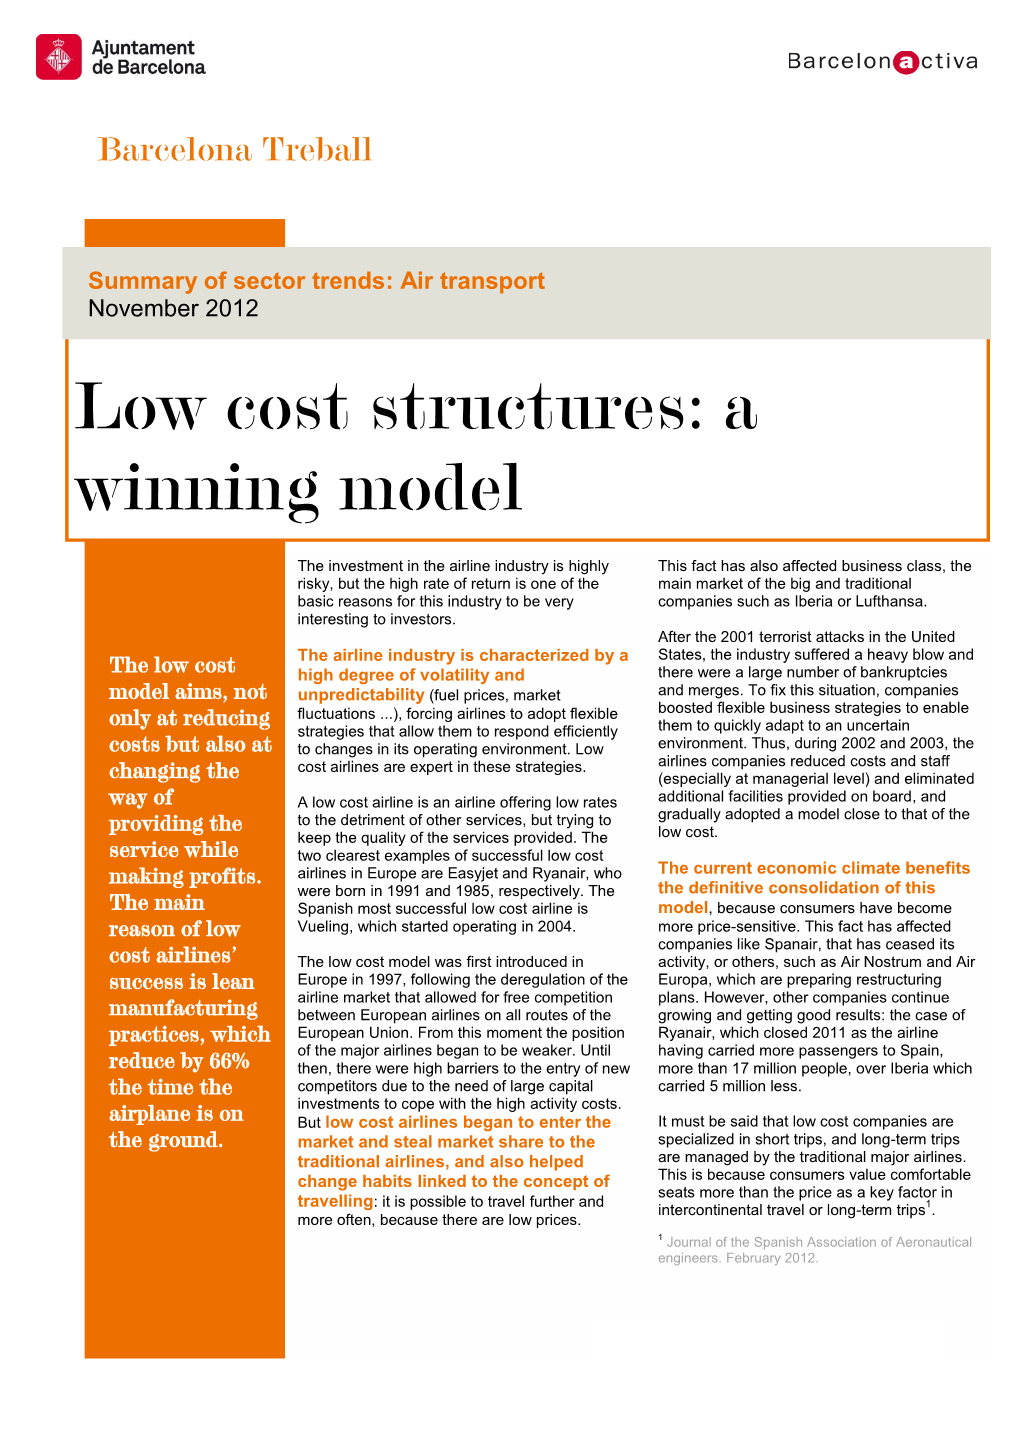 Low Cost Structures: a Winning Model